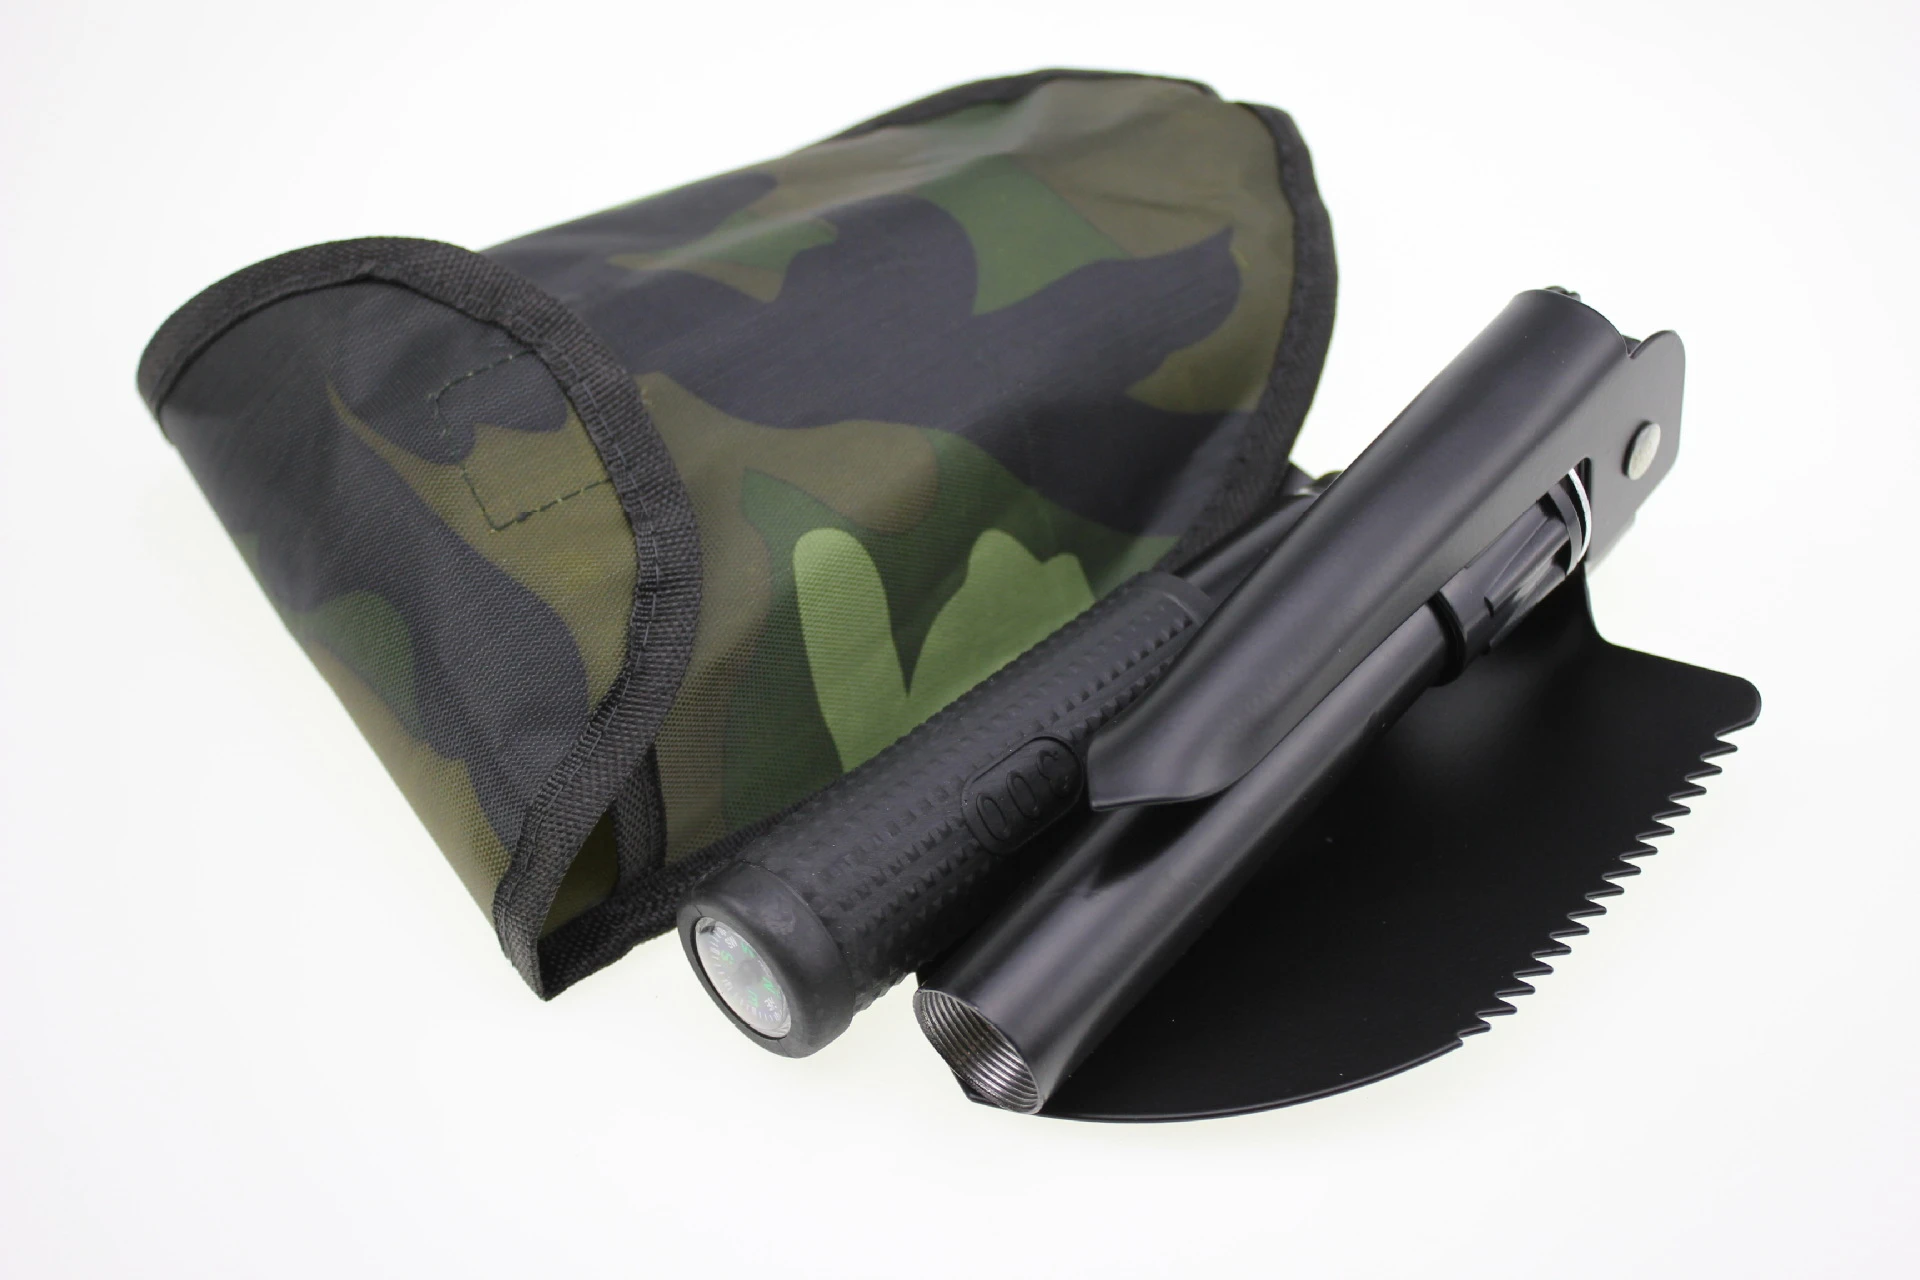 YWSPCE Military Outdoor Camping Travel Multifunctional shovel Equipment Tactical Survival Folding shovel